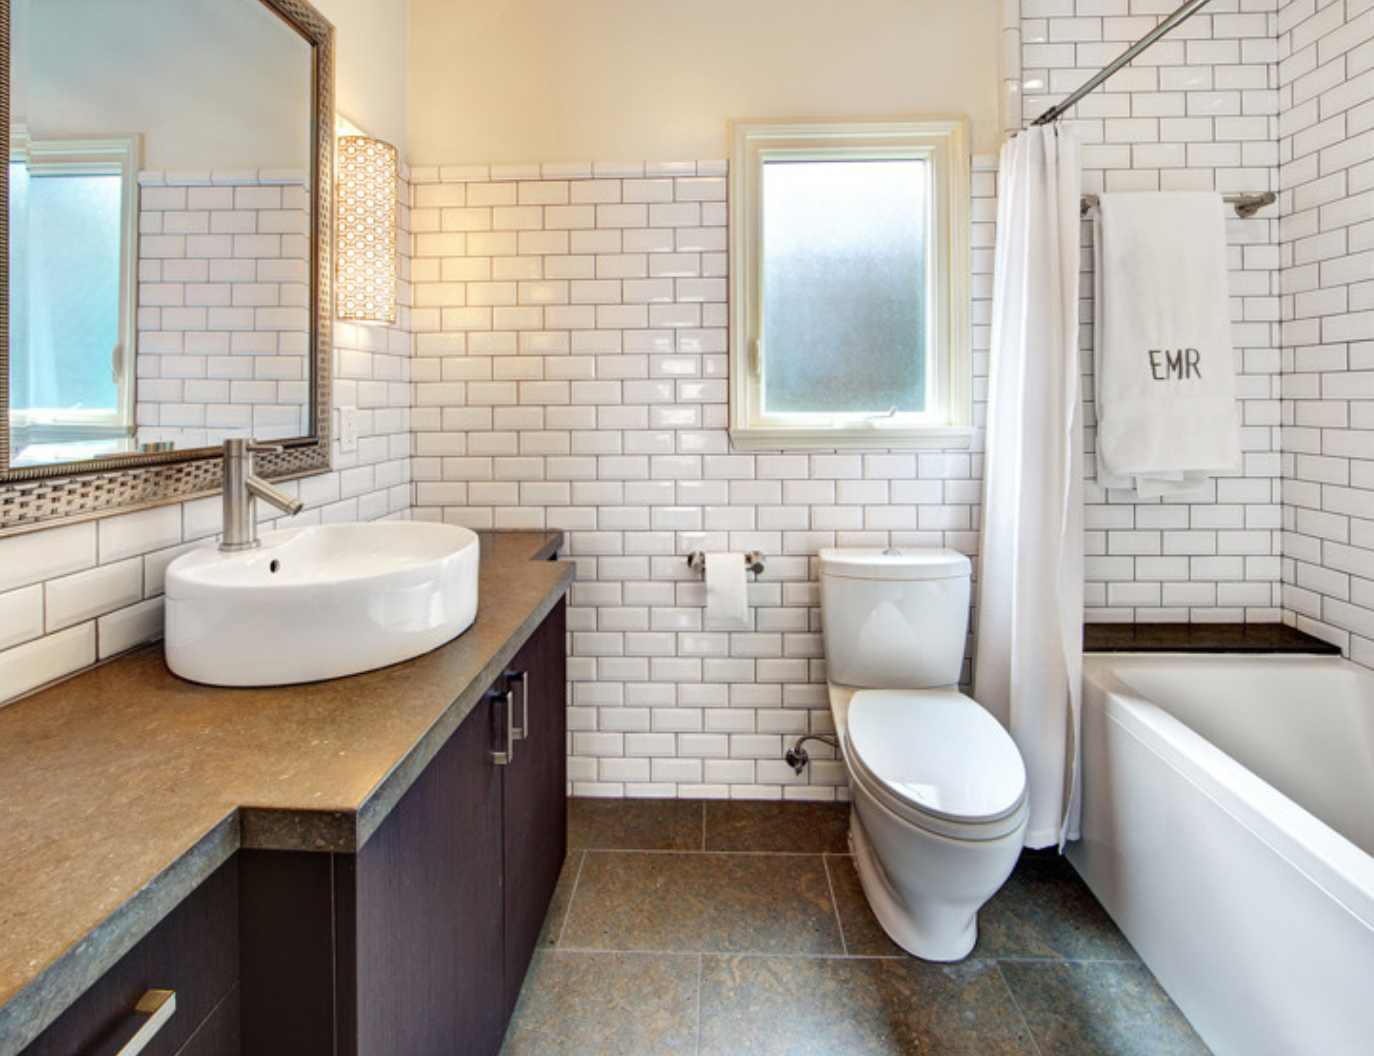 Bathroom from our West Hollywood project